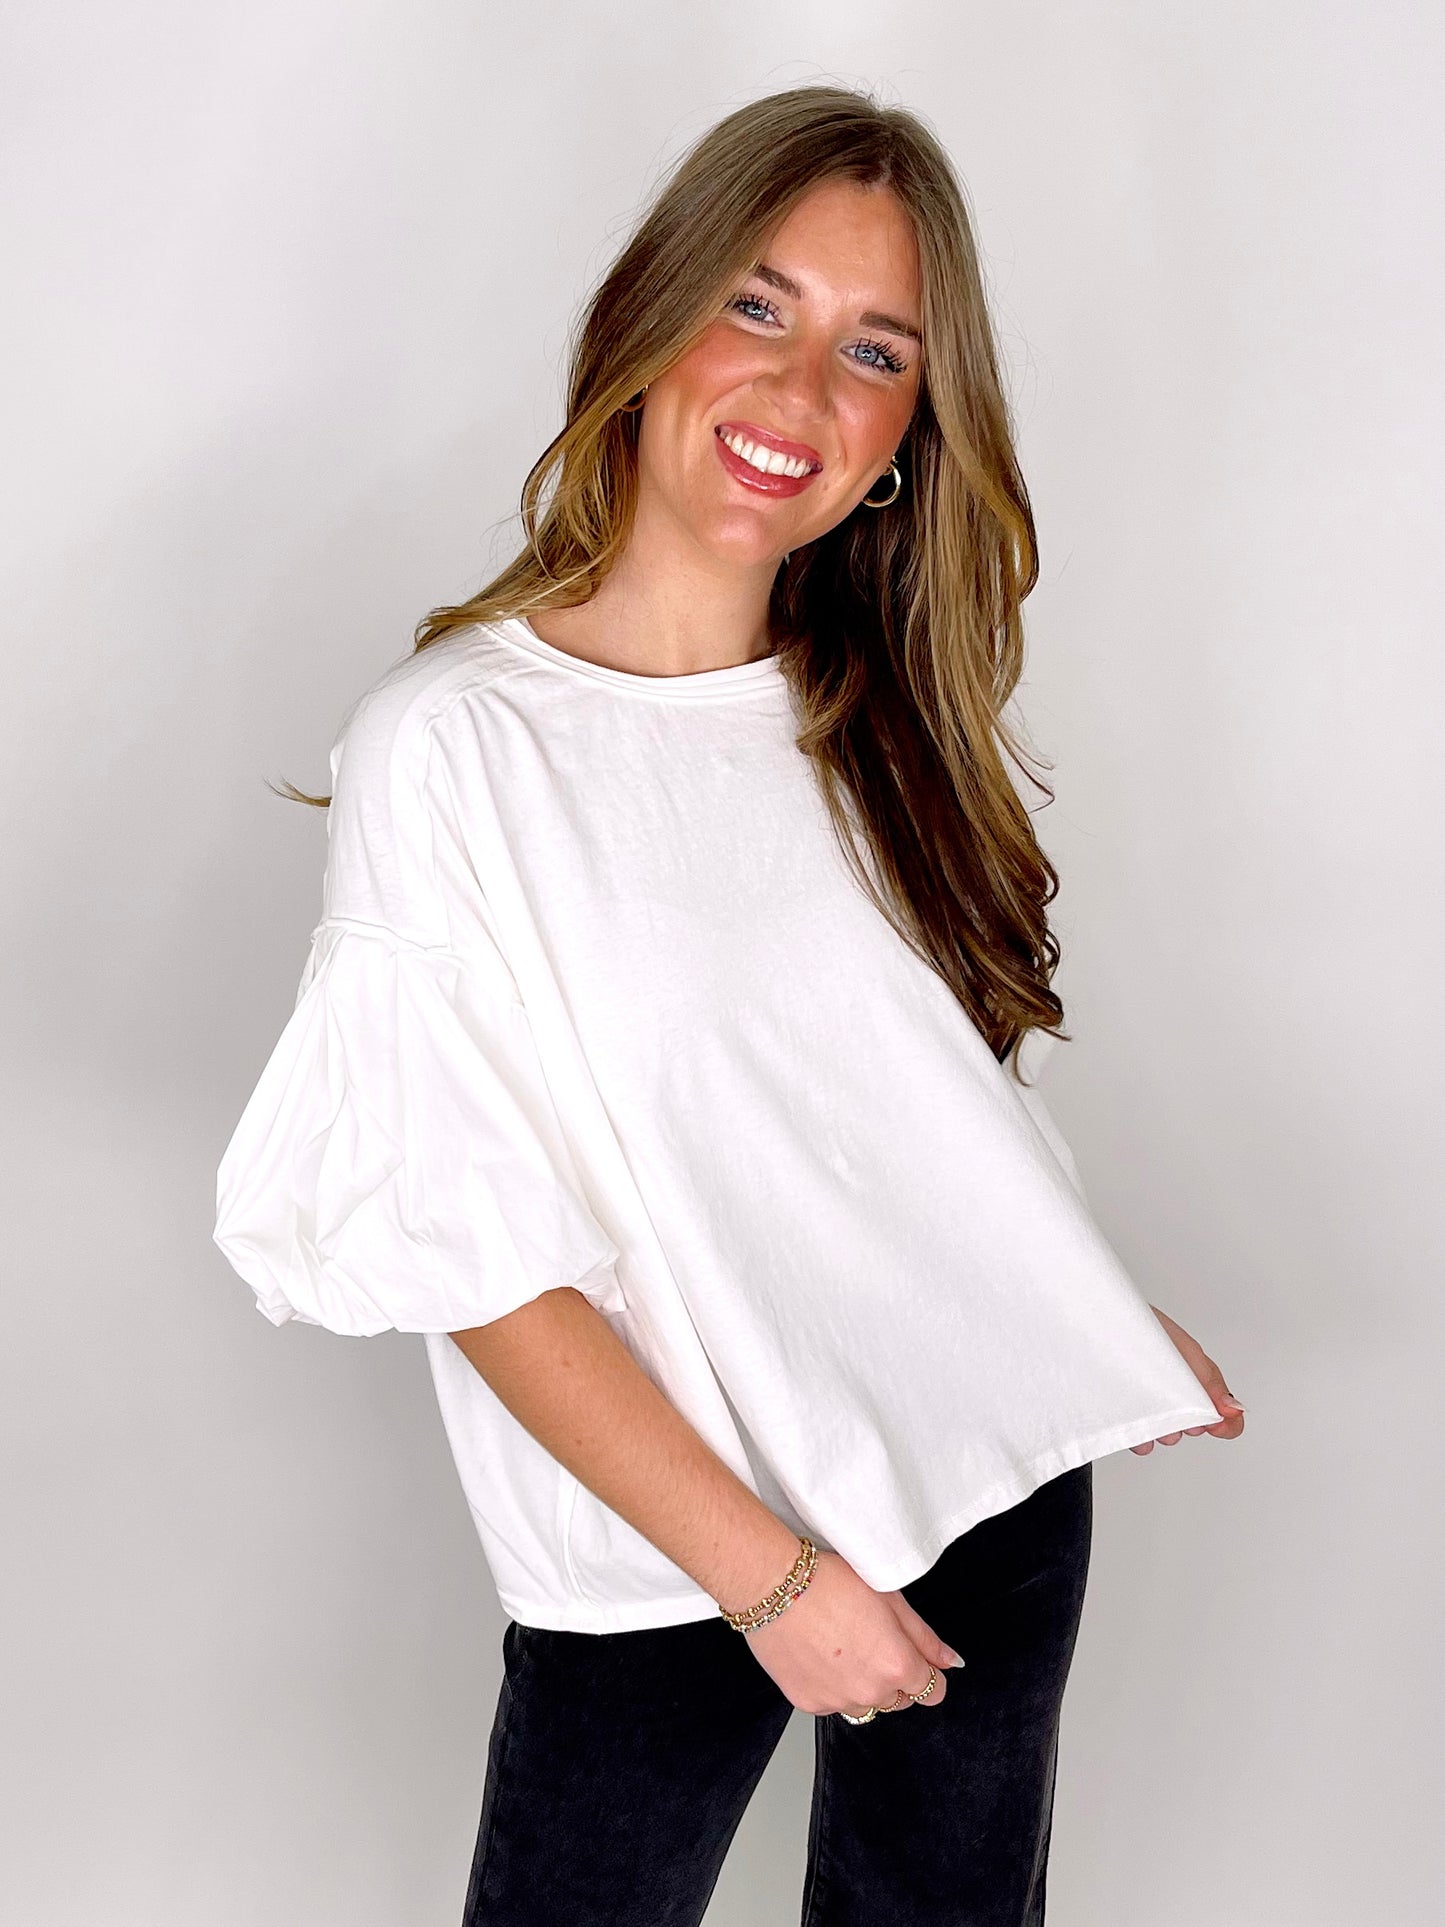 The Mae Top-Short Sleeves-ee:some-The Village Shoppe, Women’s Fashion Boutique, Shop Online and In Store - Located in Muscle Shoals, AL.